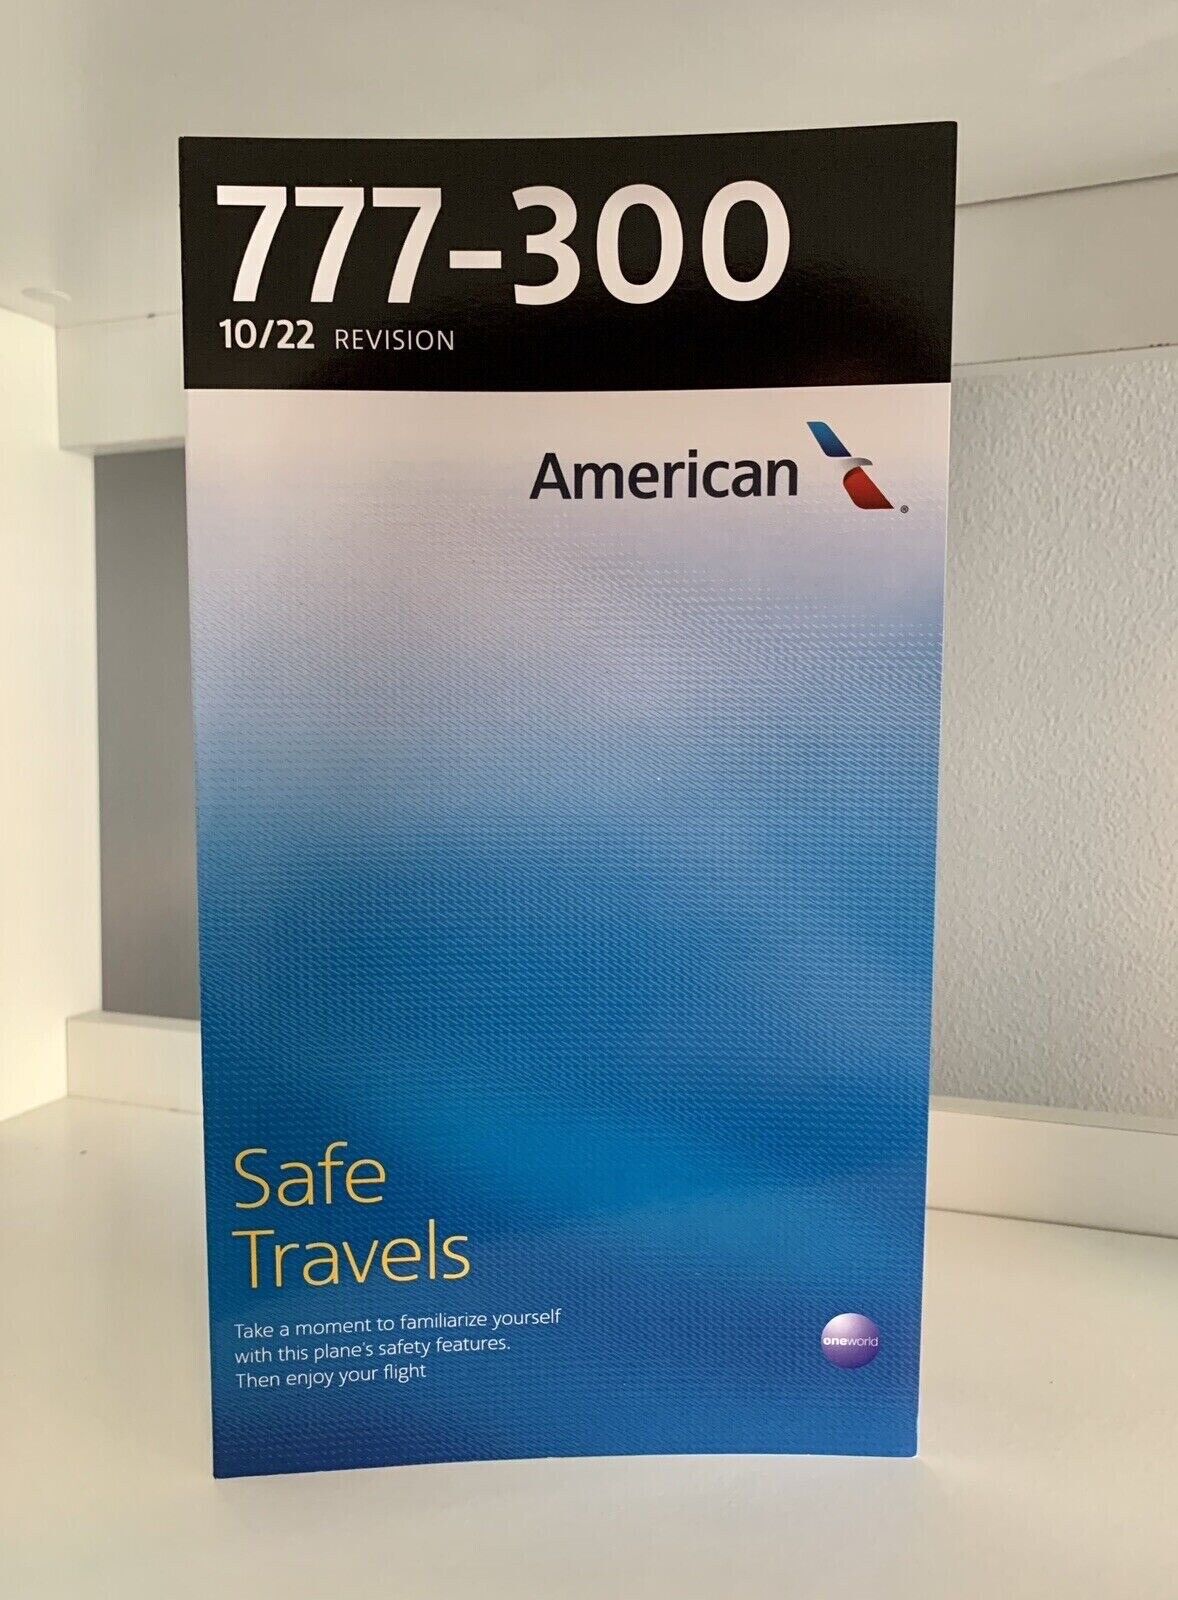 American Airlines Boeing B777-300 (10/22 Revision) Air Safety Card